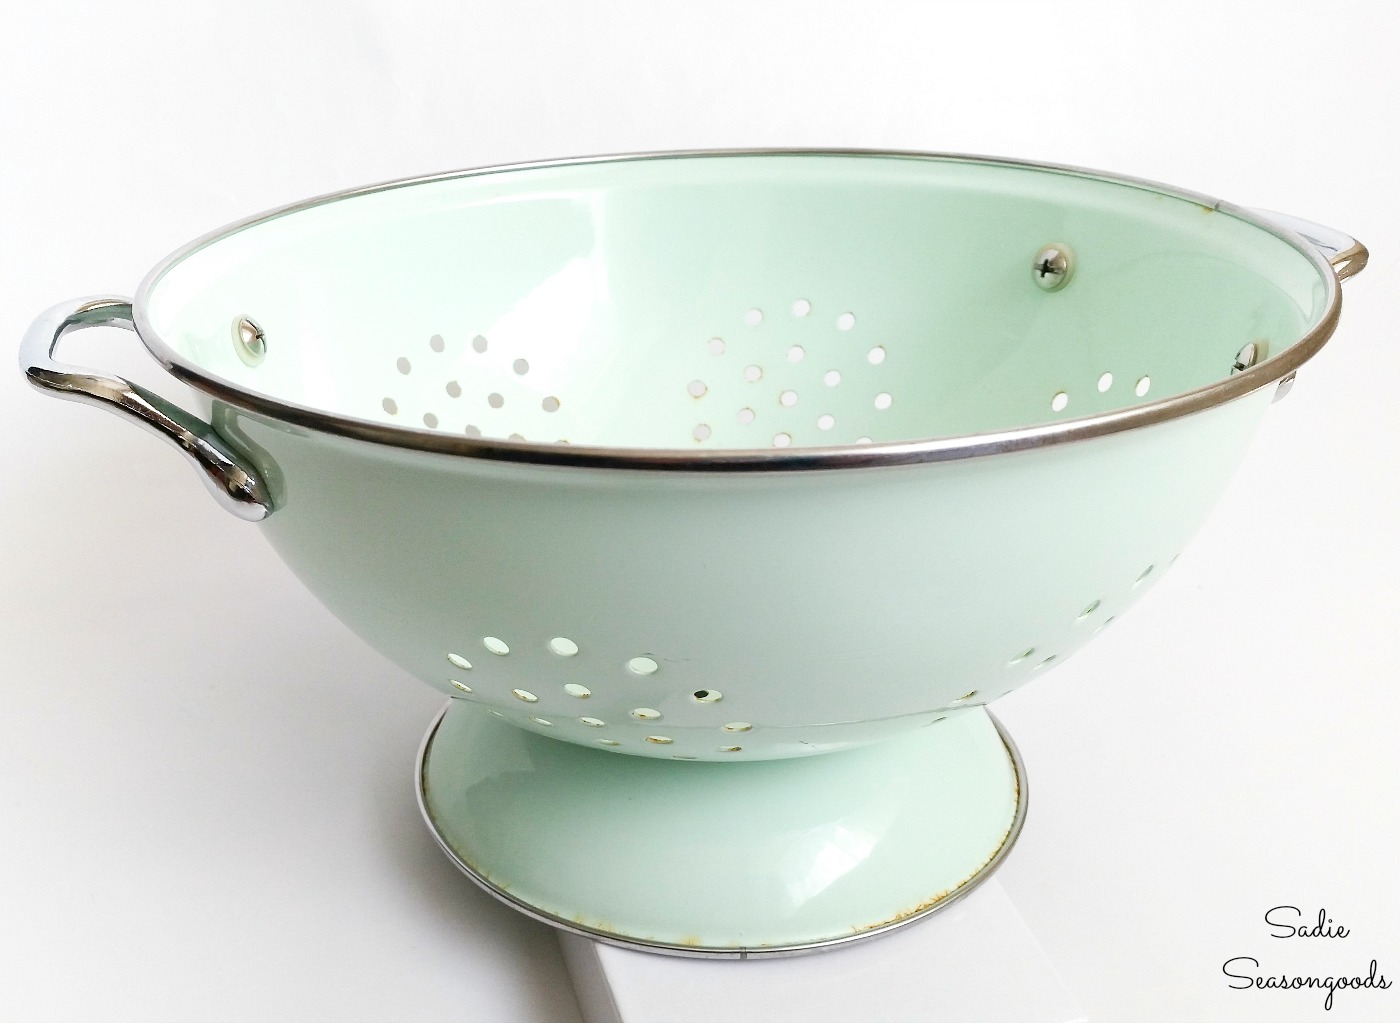 Enamel colander to be upcycled into a hanging basket and planter